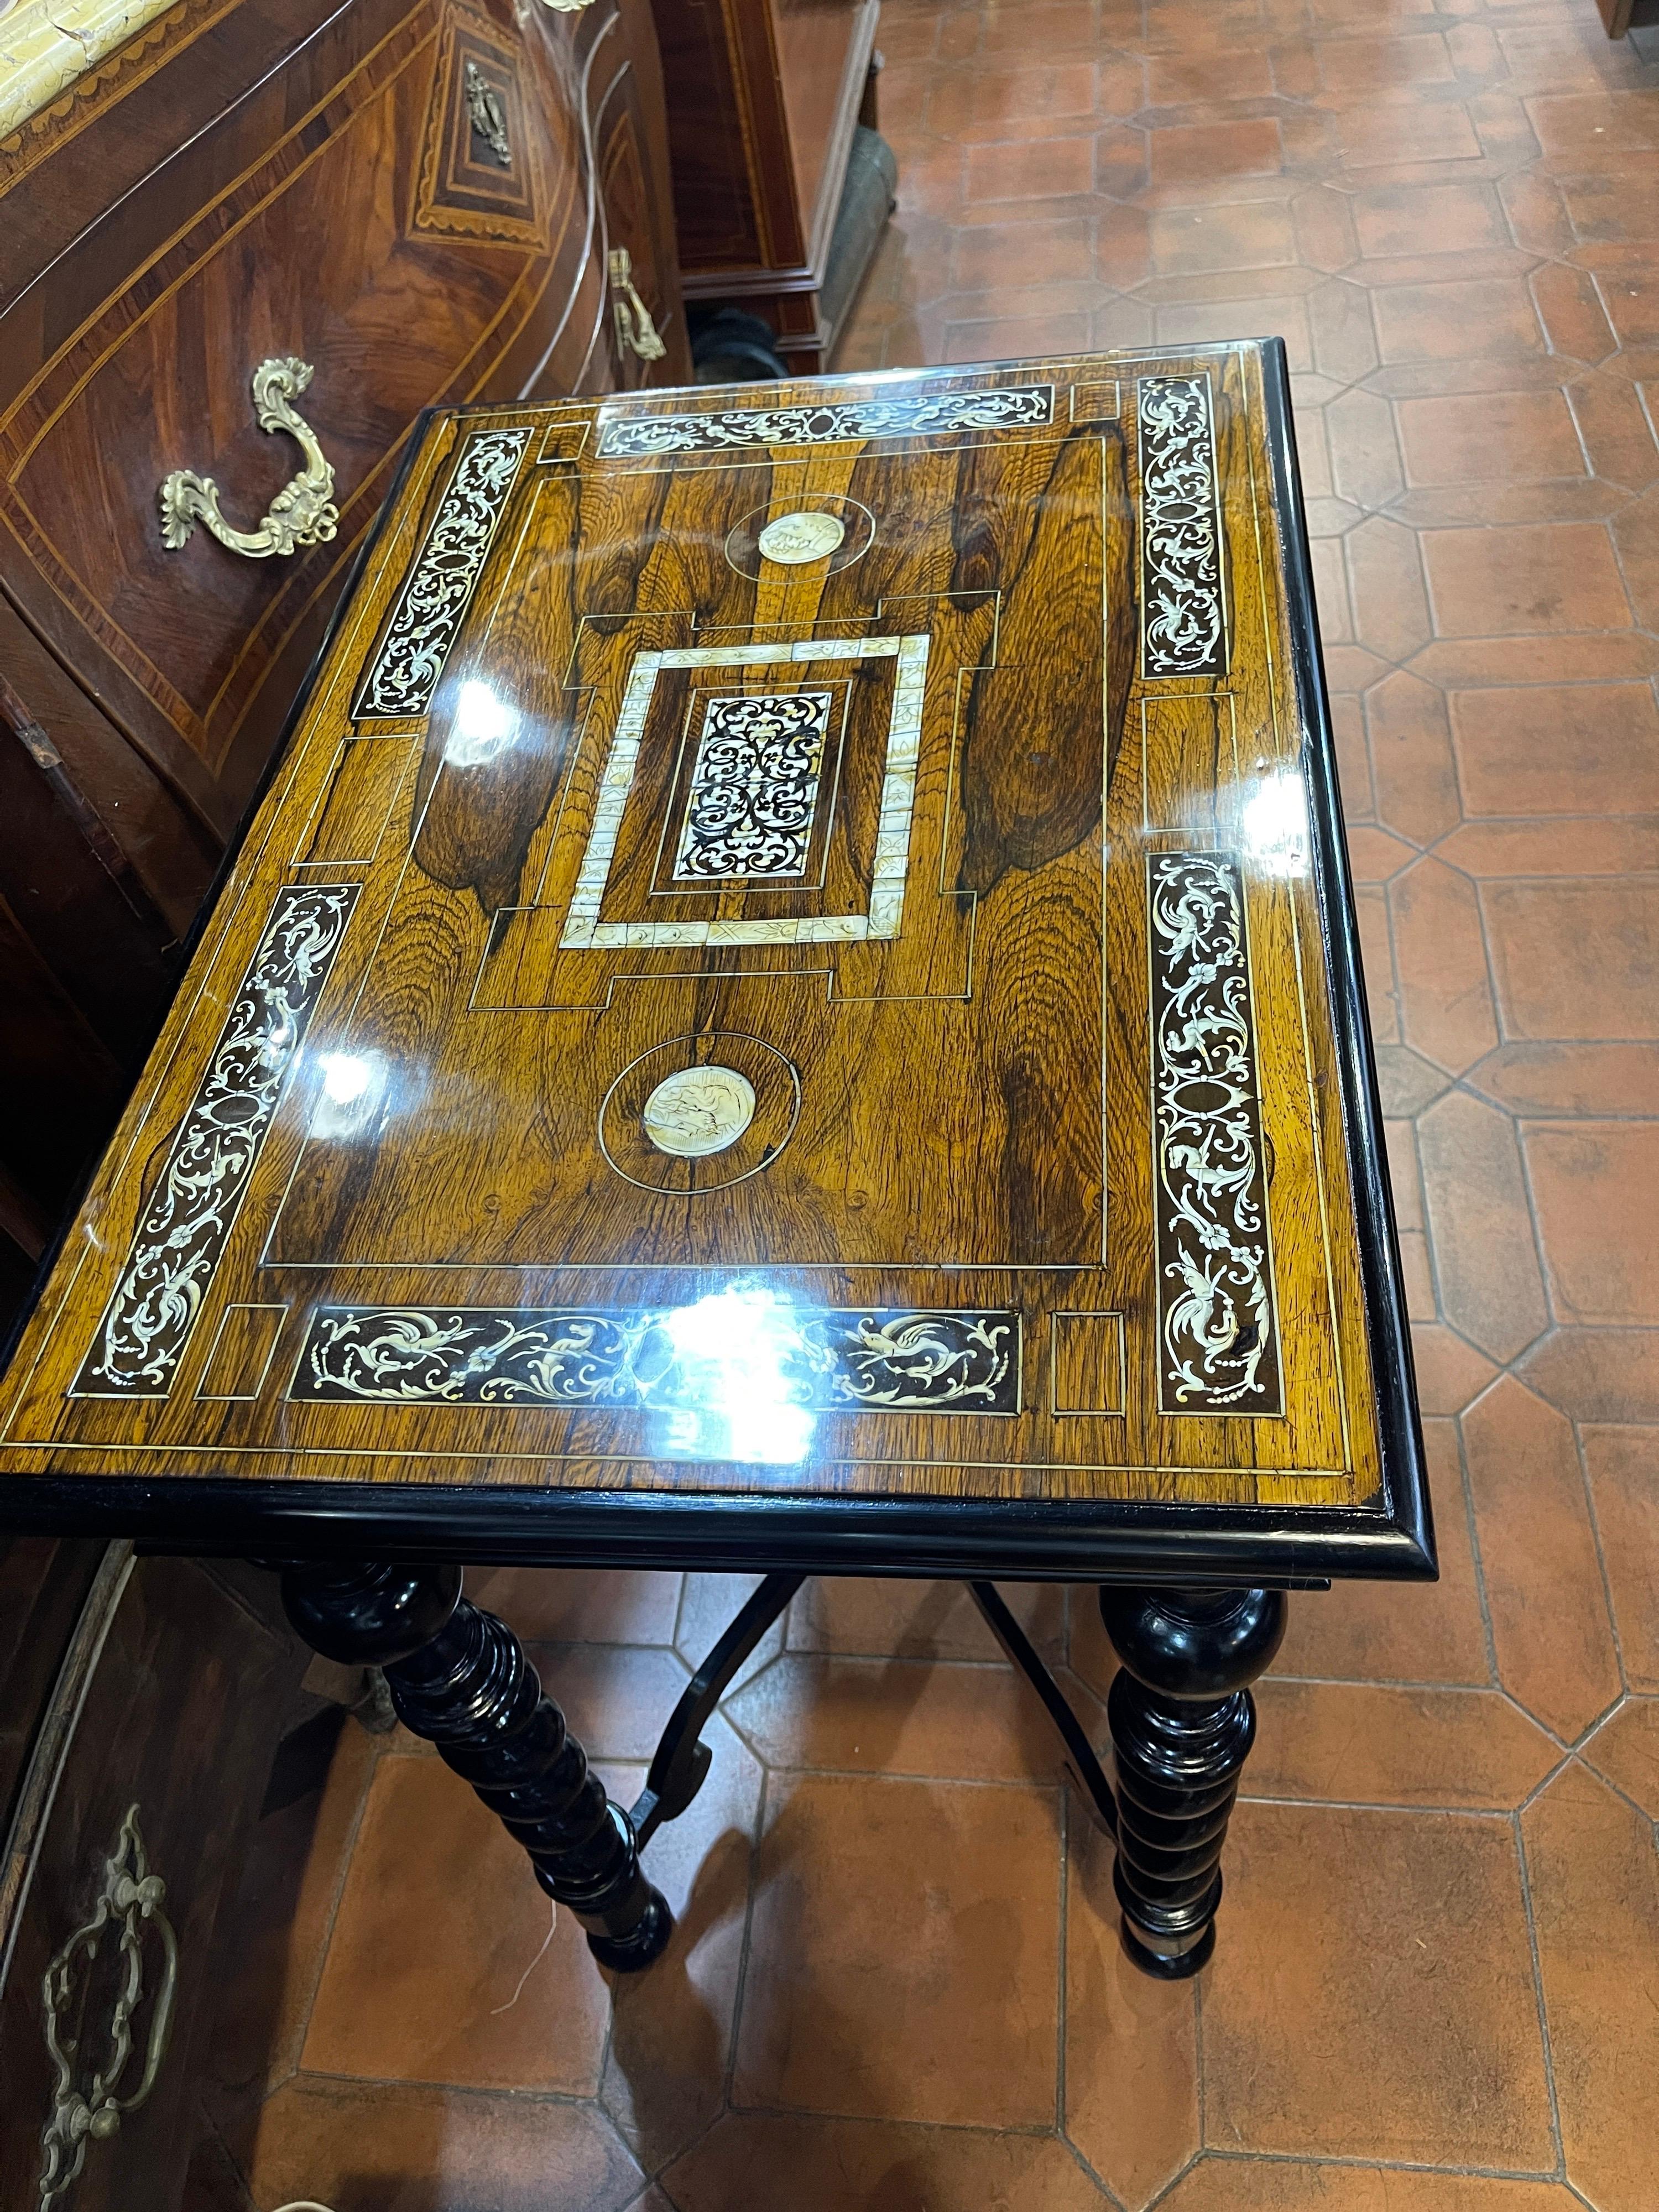 Table of Italian origin, circa 1840, Lazio Region, City of Rome, in rosewood and inlaid with ivory.
On the top are the faces of the nobles to whom it was given, there is no documentation as to who they might be. The rest is in Impressive. present